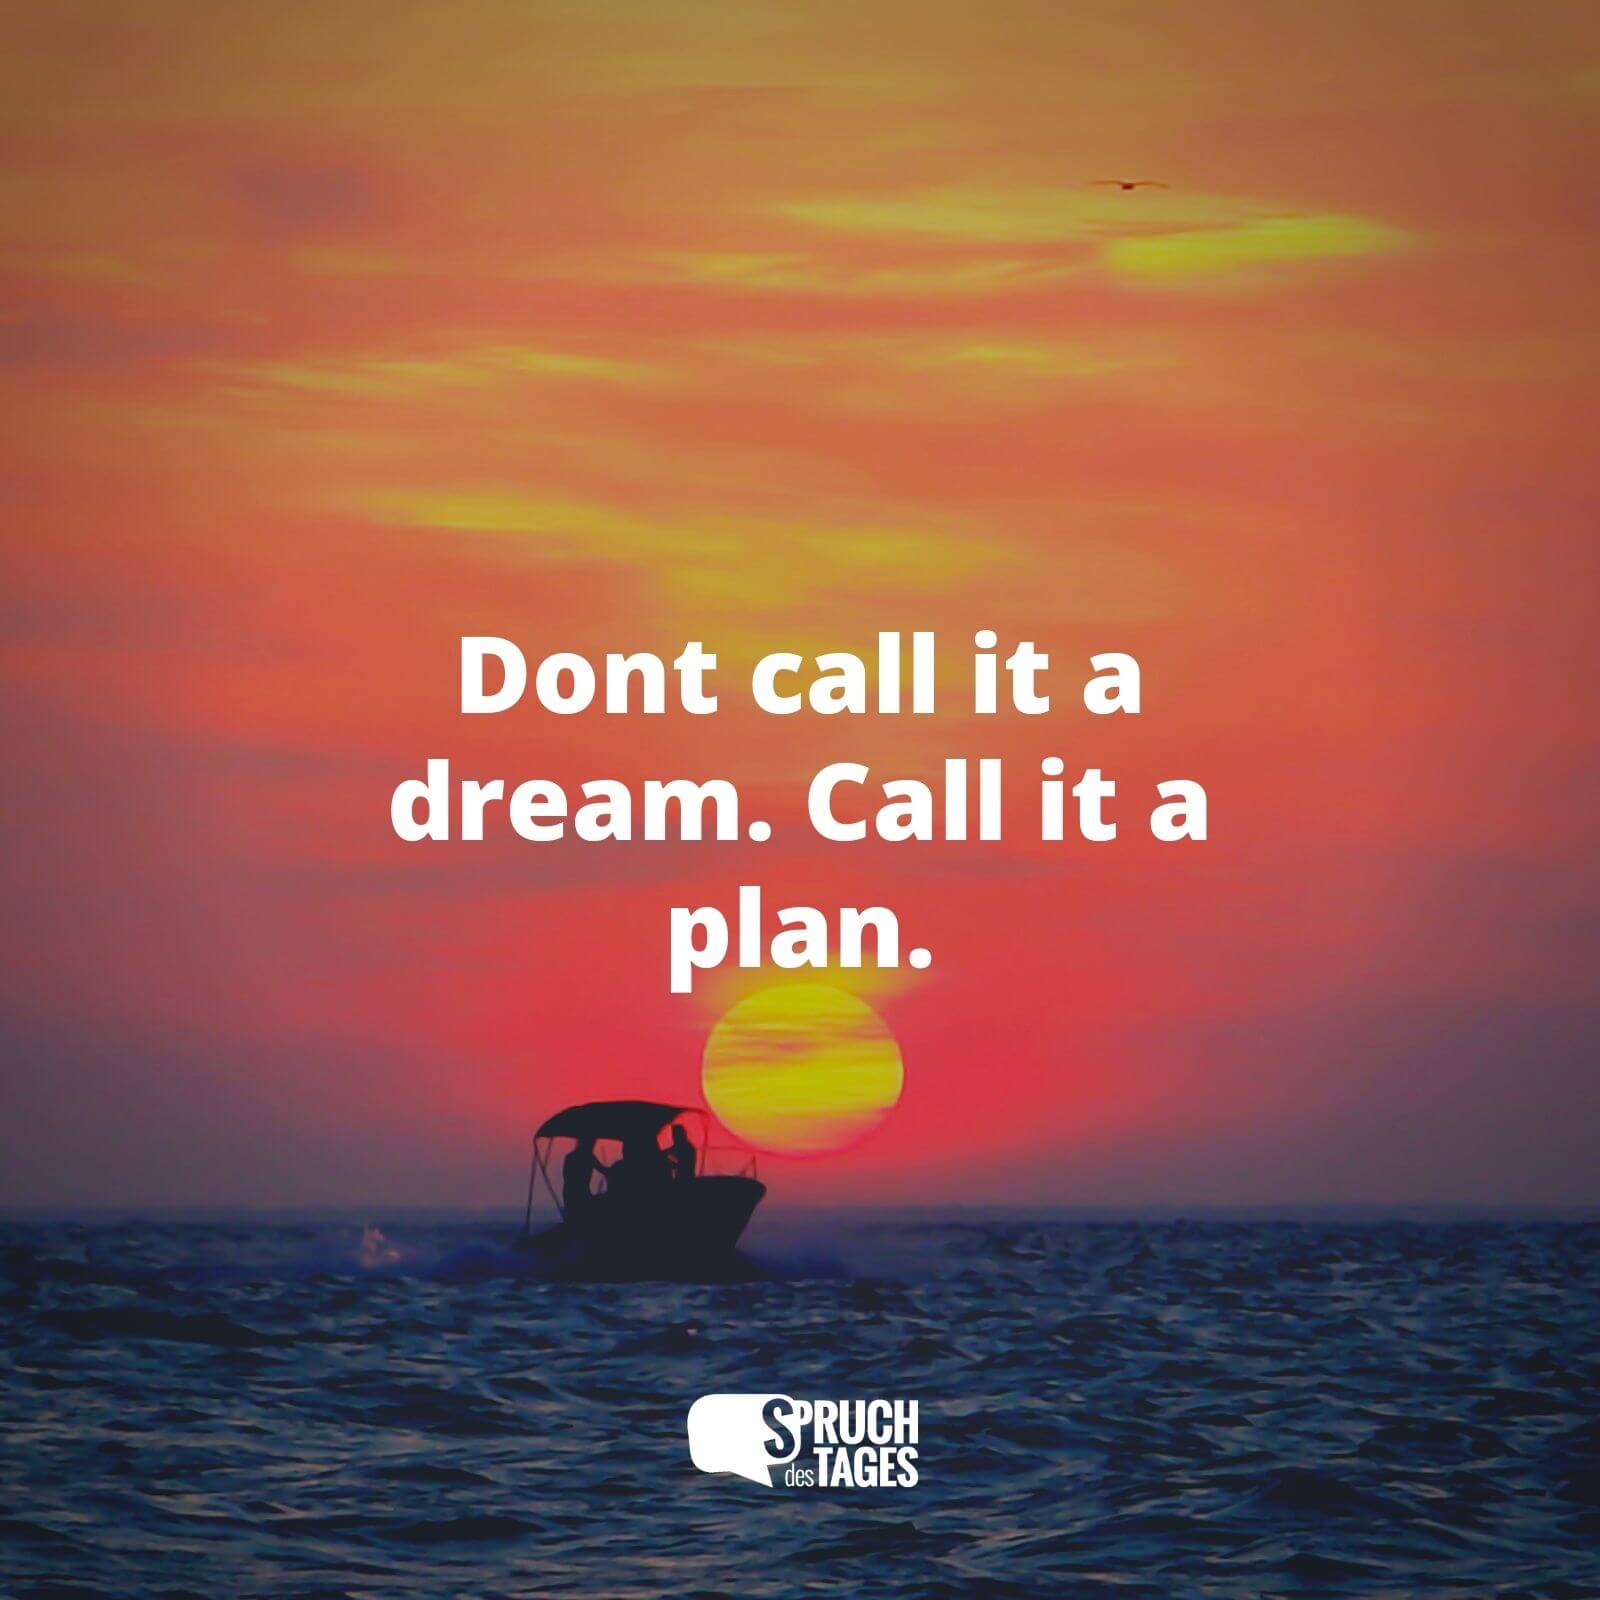 Dont call it a dream. Call it a plan.